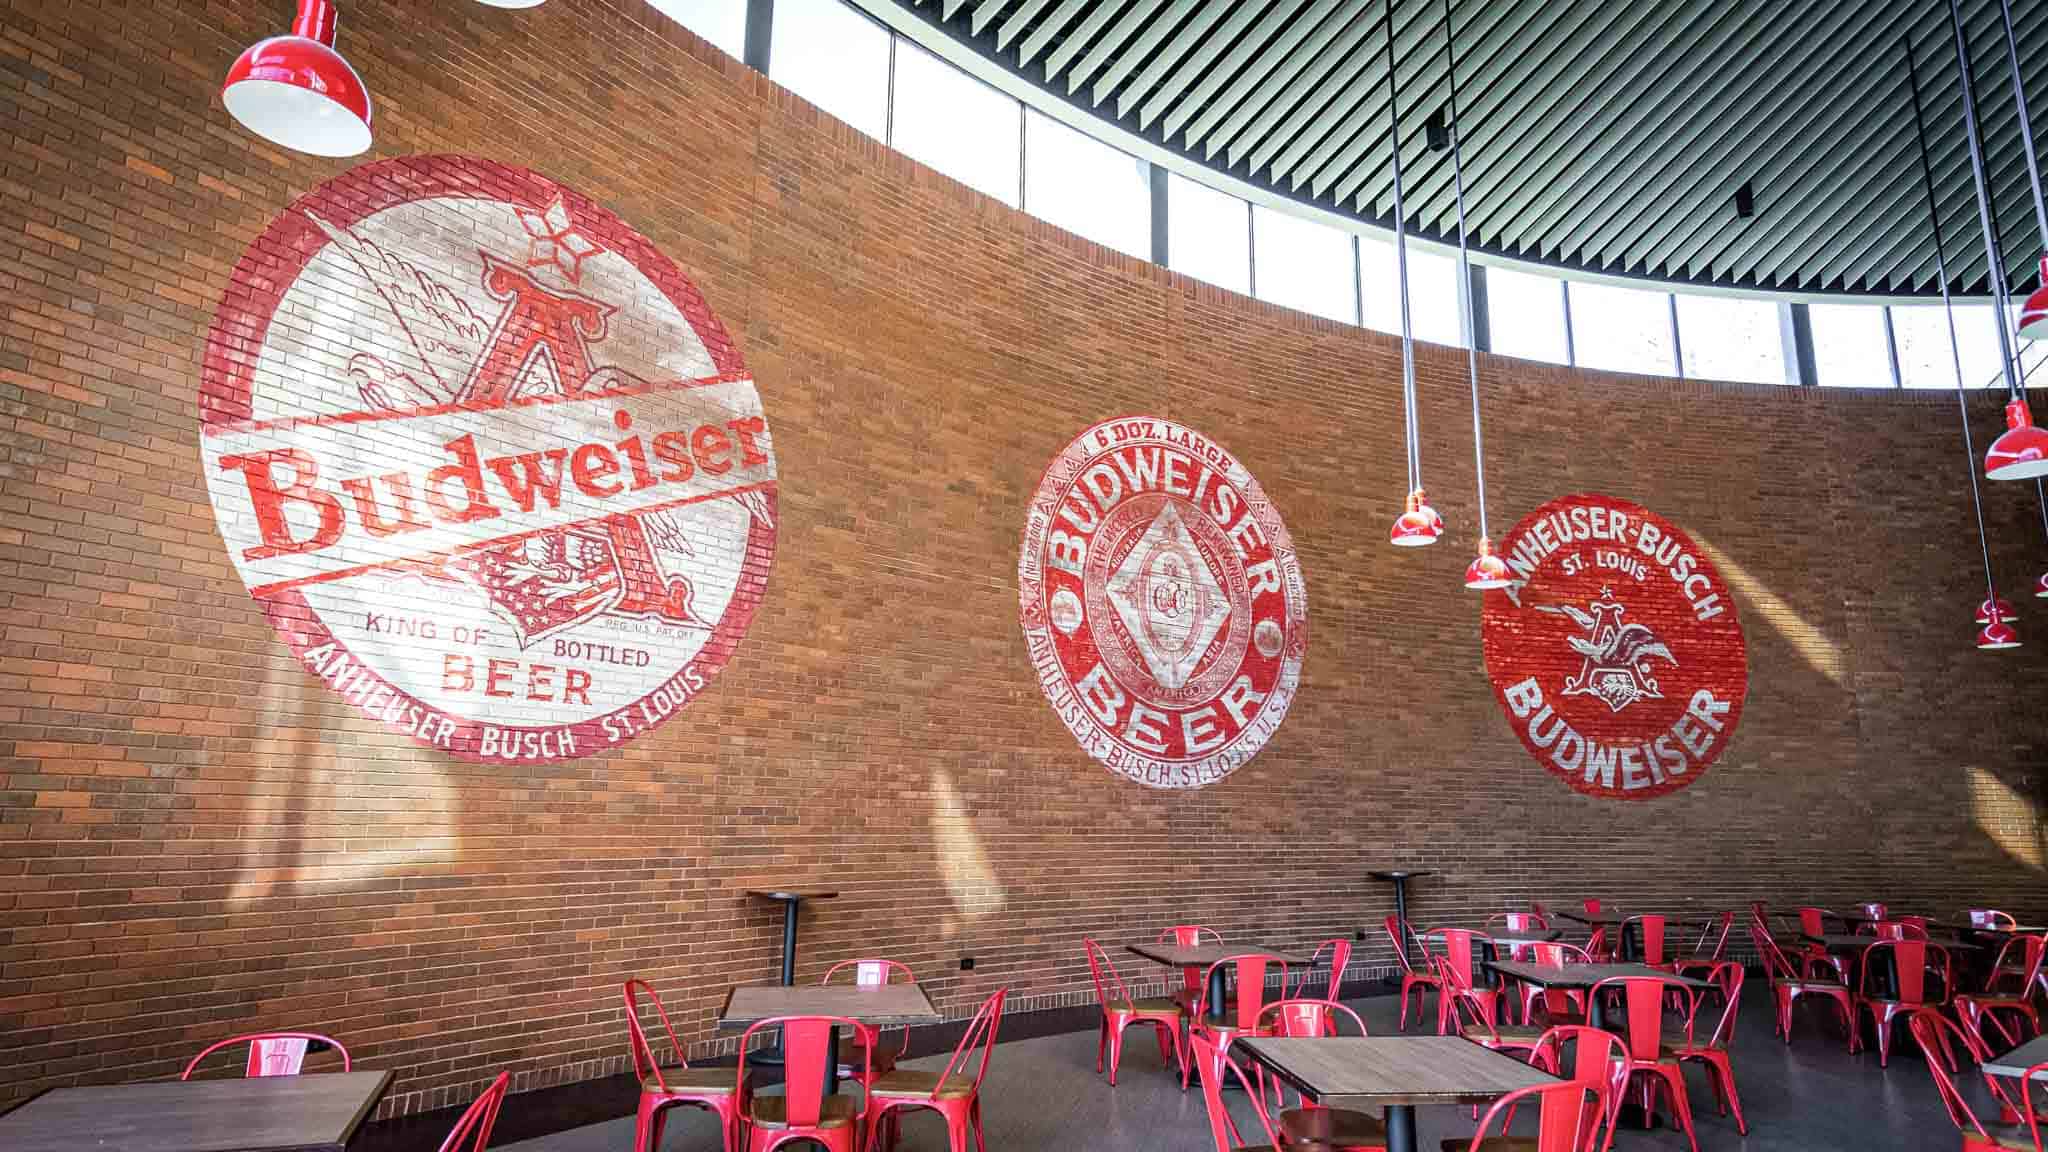 Red Hand painted Budweiser logos on brick wall at Anhueser-Busch's Headquarters